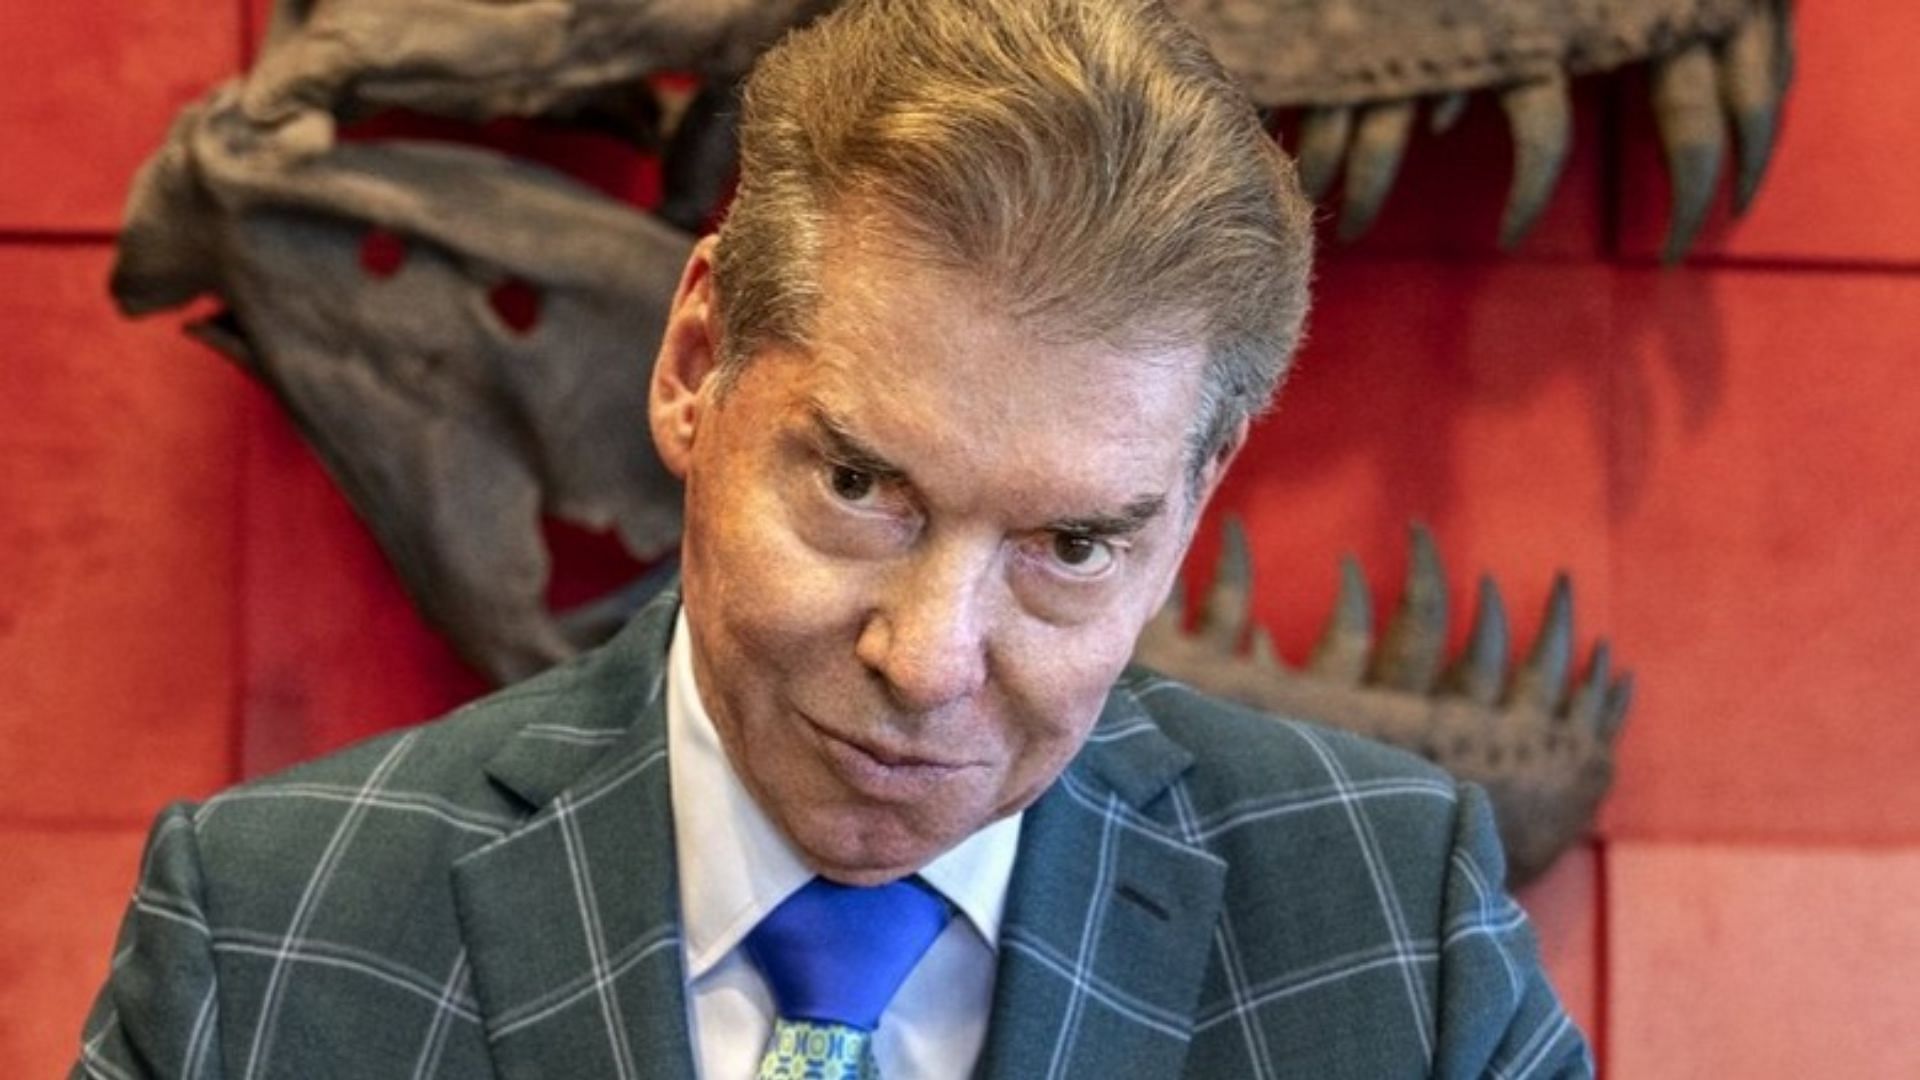 Vince McMahon is a co-founder of WWE